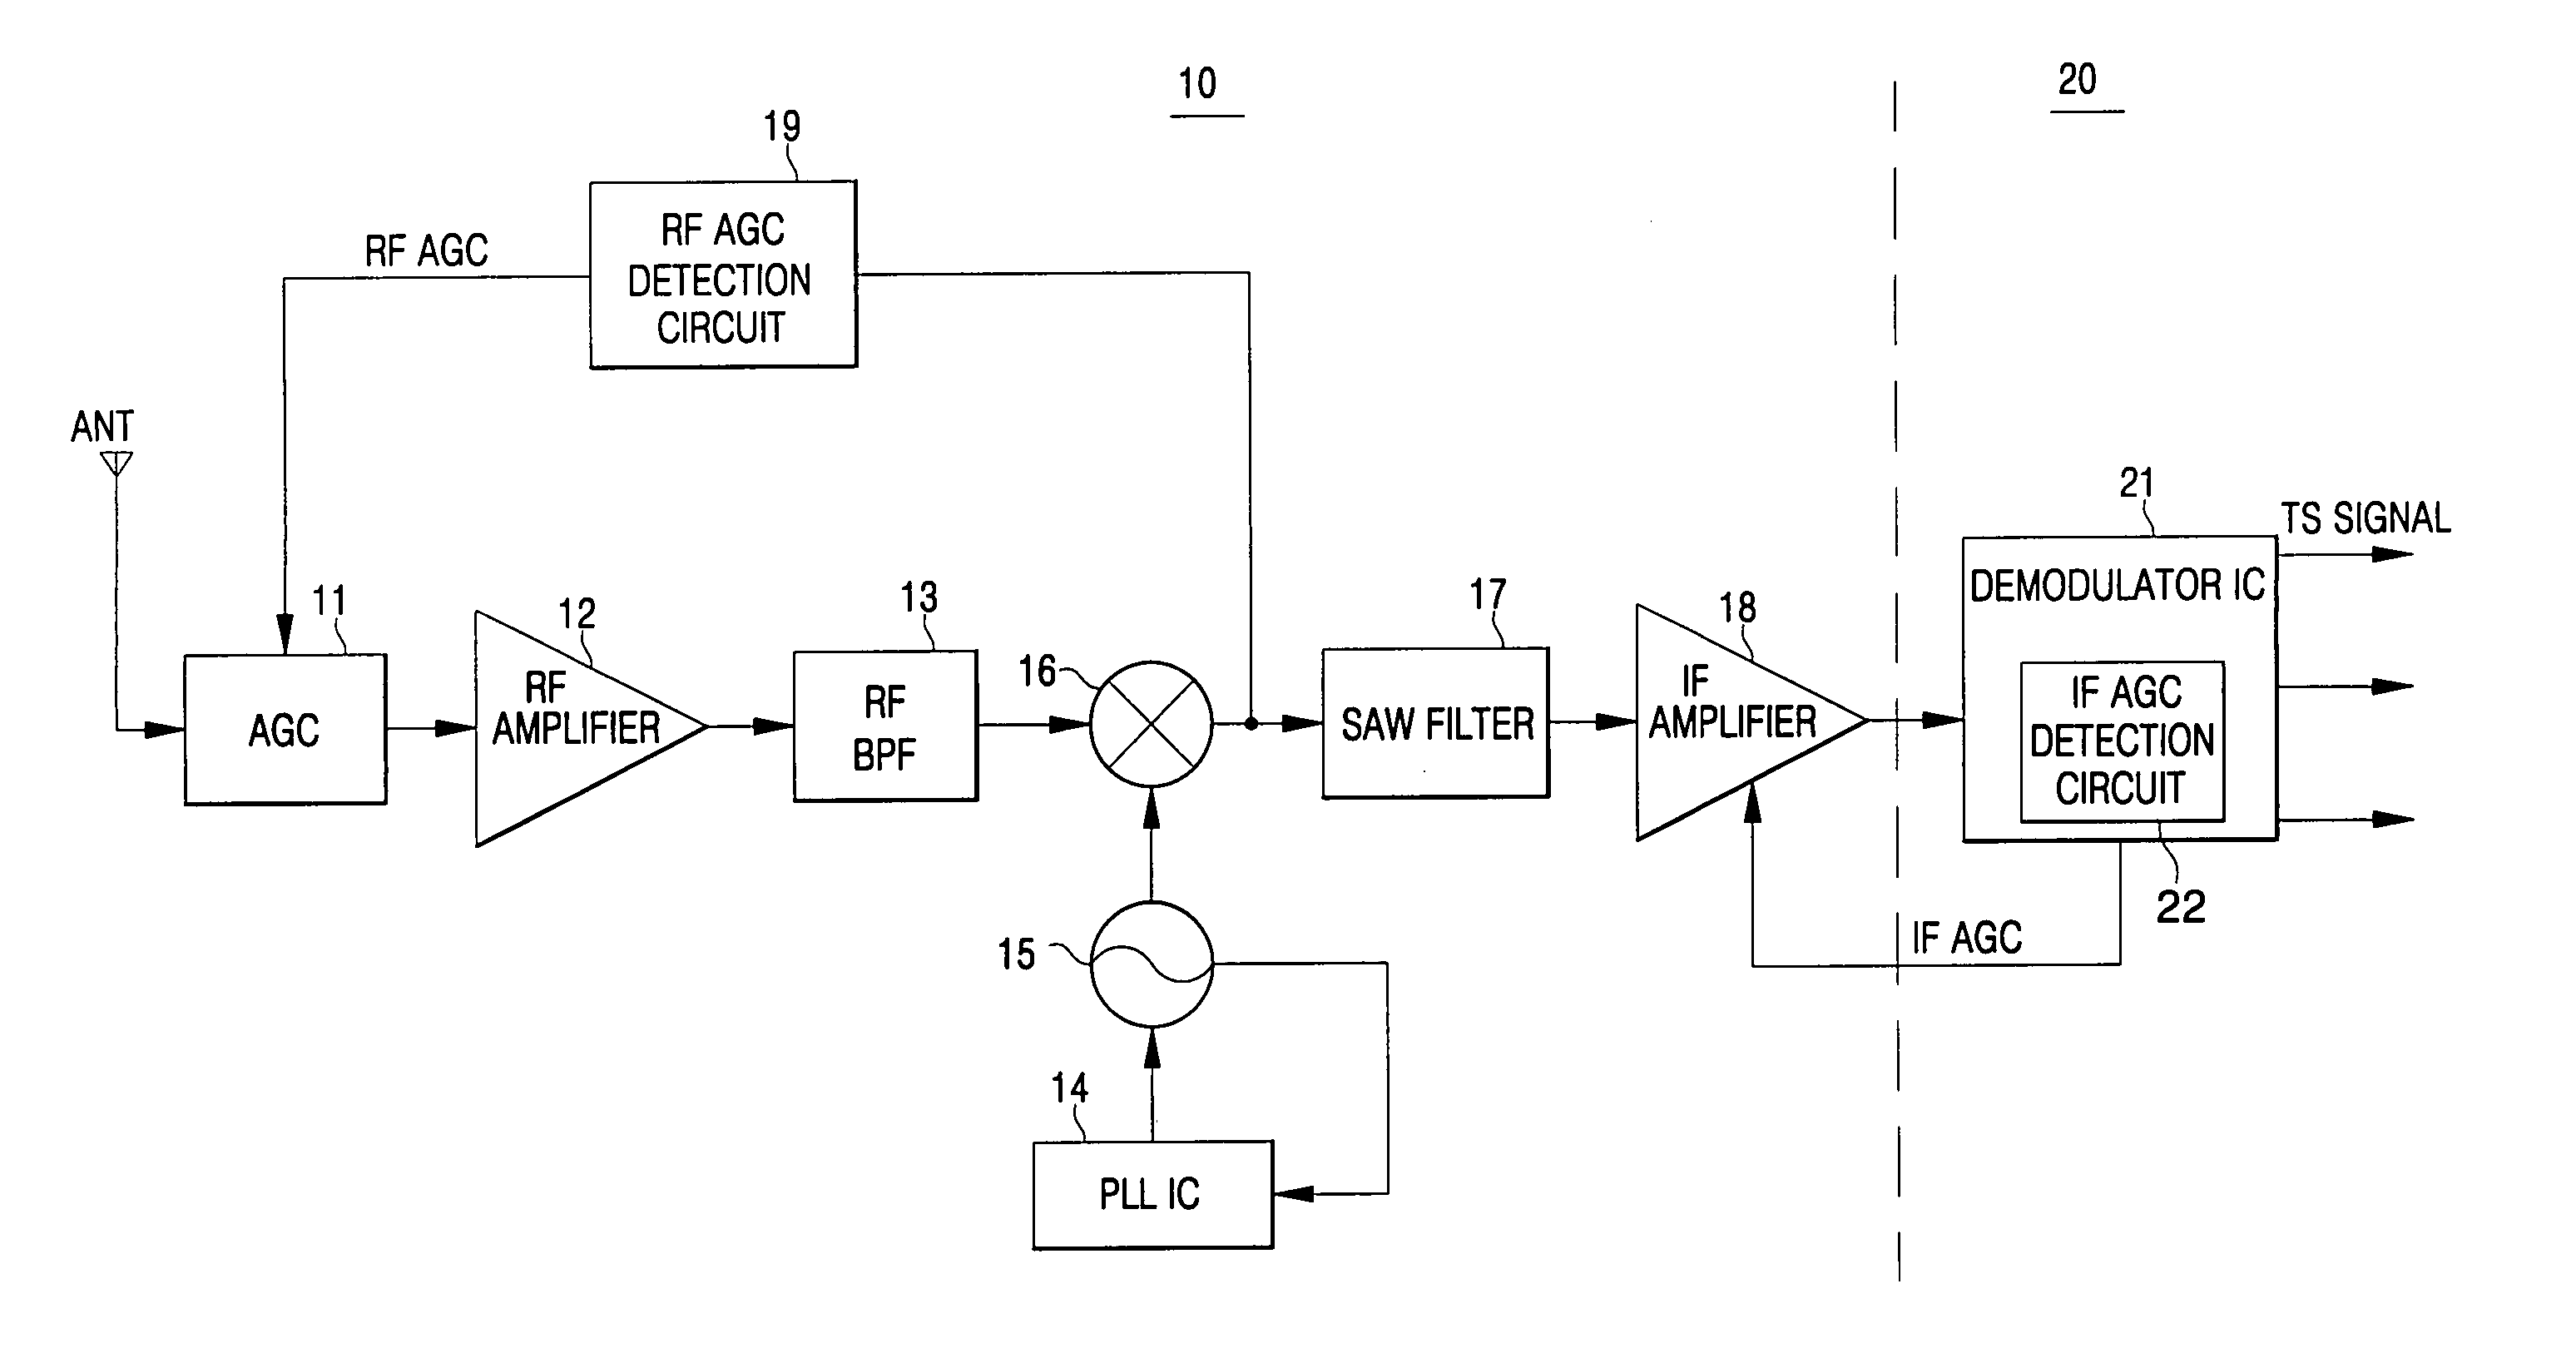 Power-saving channel scanning for multi-channel broadcasting